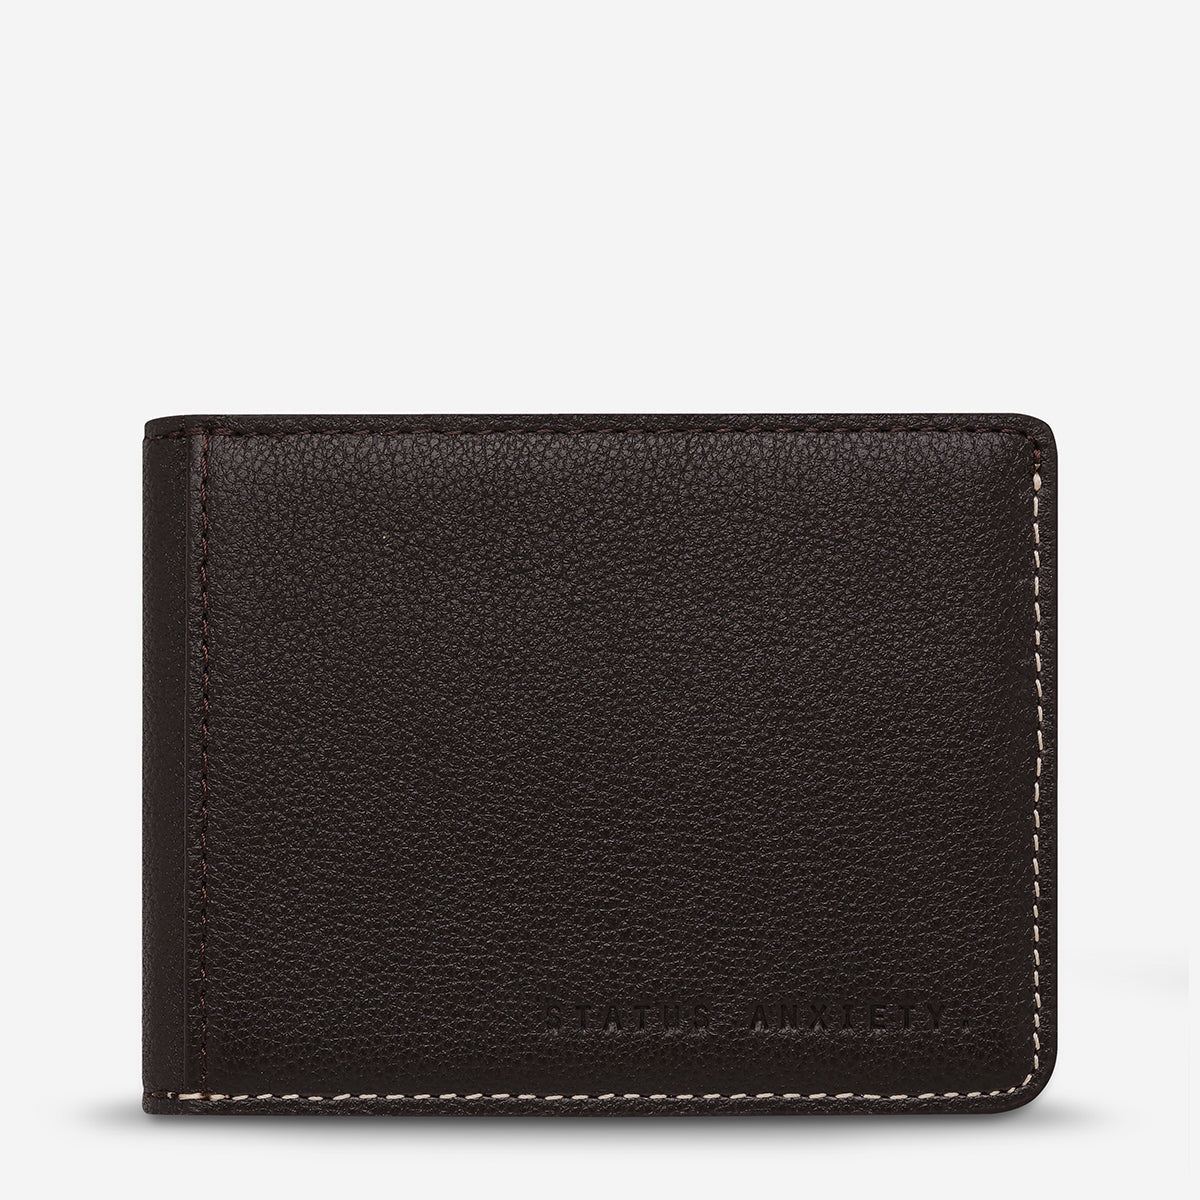 Status Anxiety - Ethan Wallet - Chocolate